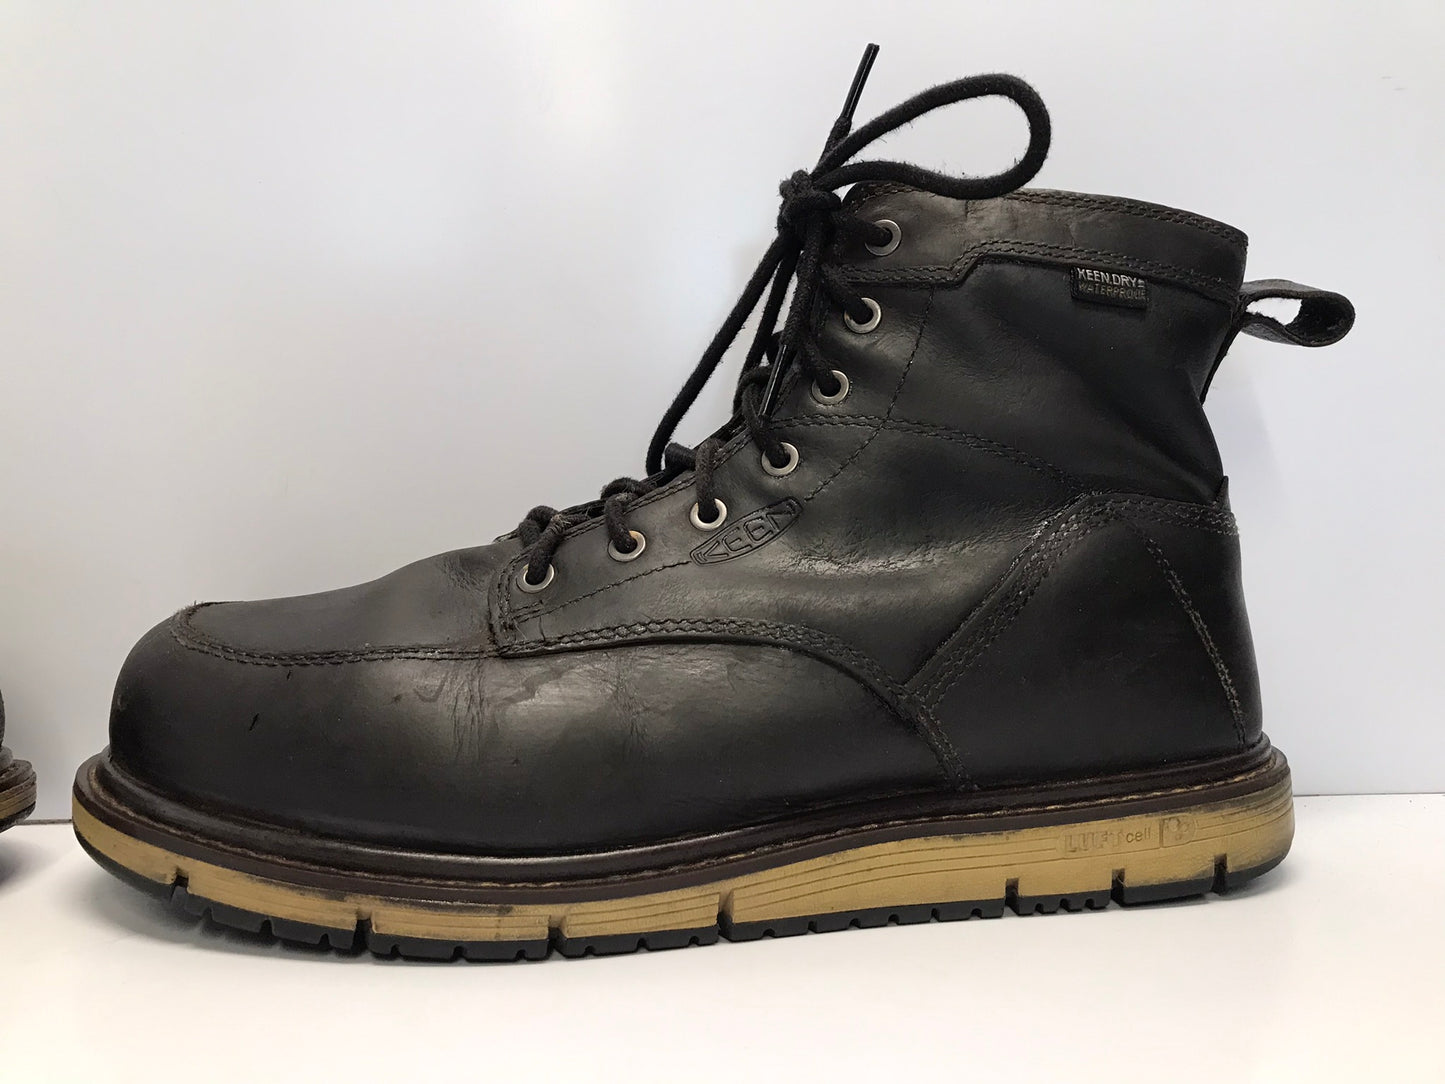 Work Boots Men Size 11.5 Keen Utility San Jose Leather Green Patch CSA Alloy Toe Waterproof COnstruction Or Fly Fishing Like New